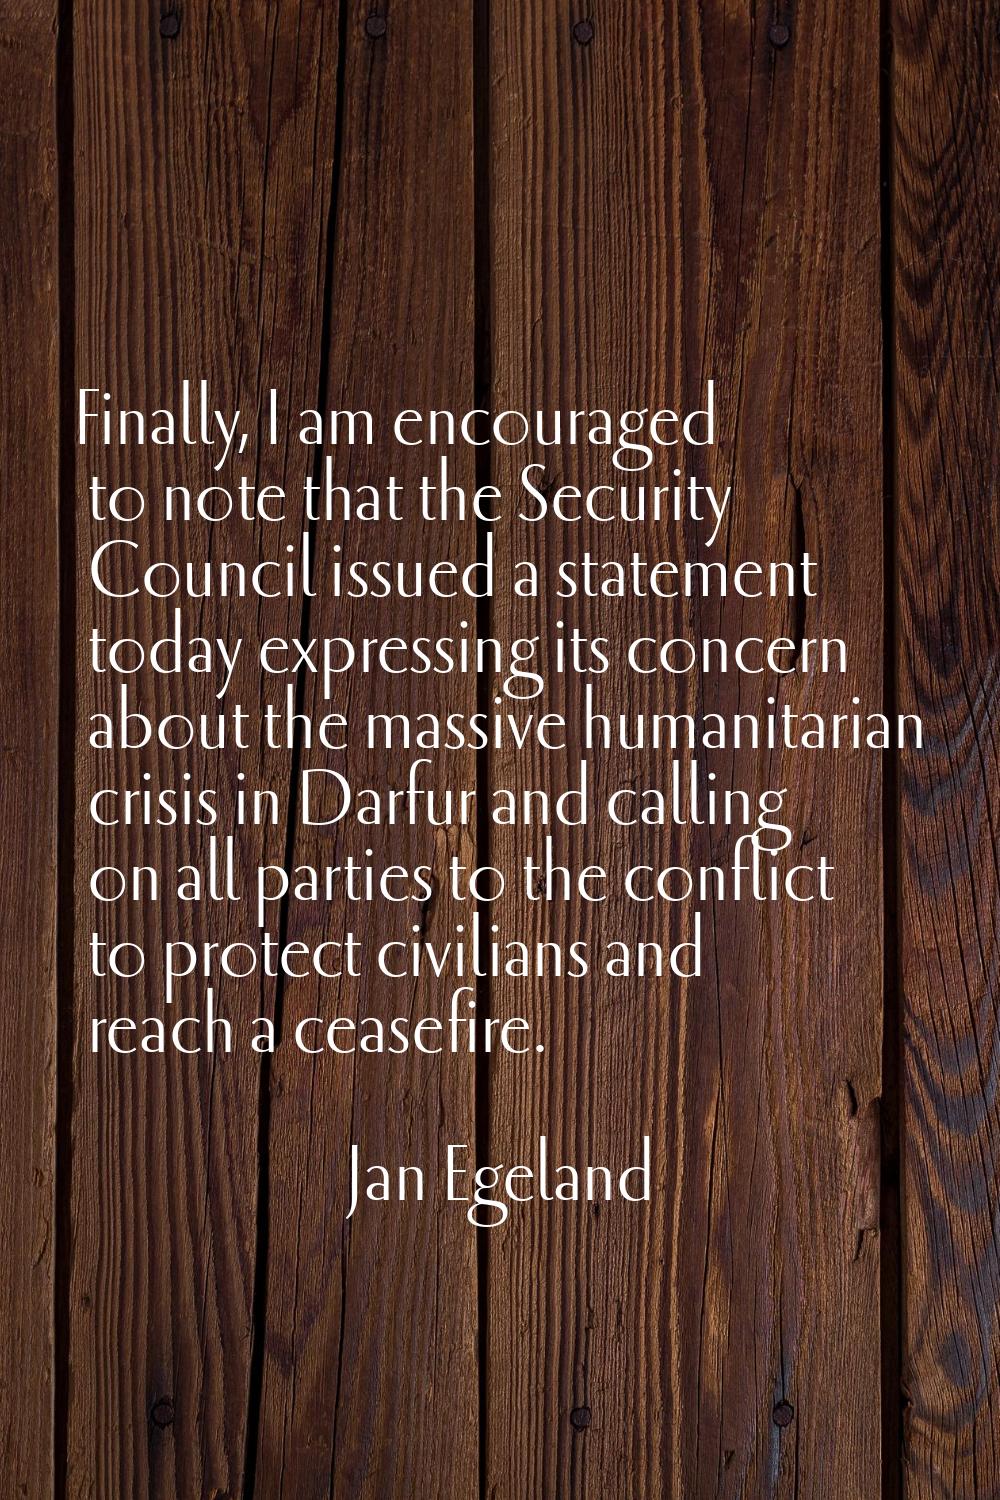 Finally, I am encouraged to note that the Security Council issued a statement today expressing its 